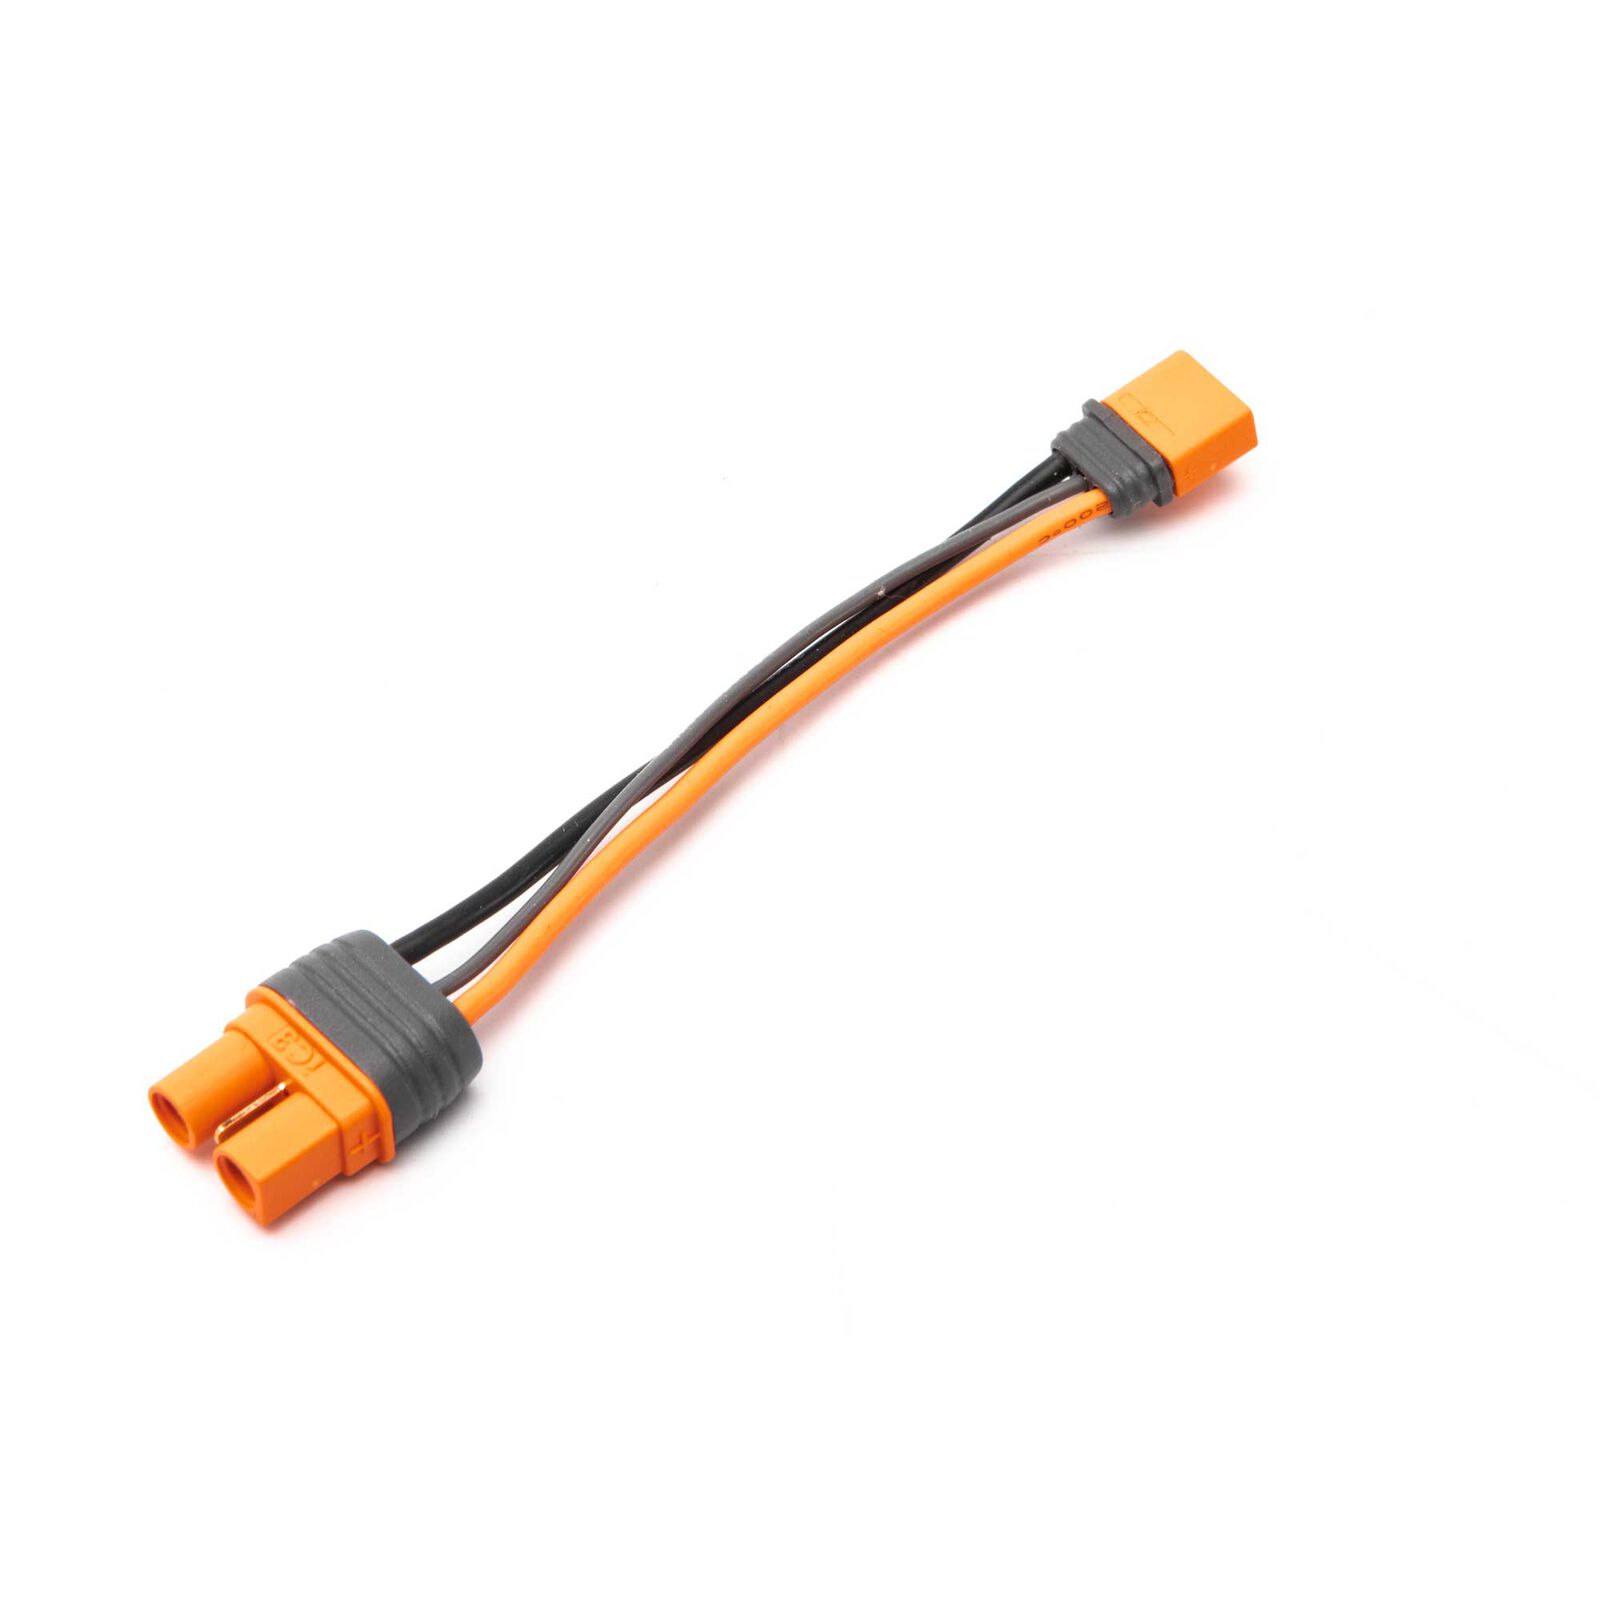 Cables & connectors at Modellsport Schweighofer - Order online now